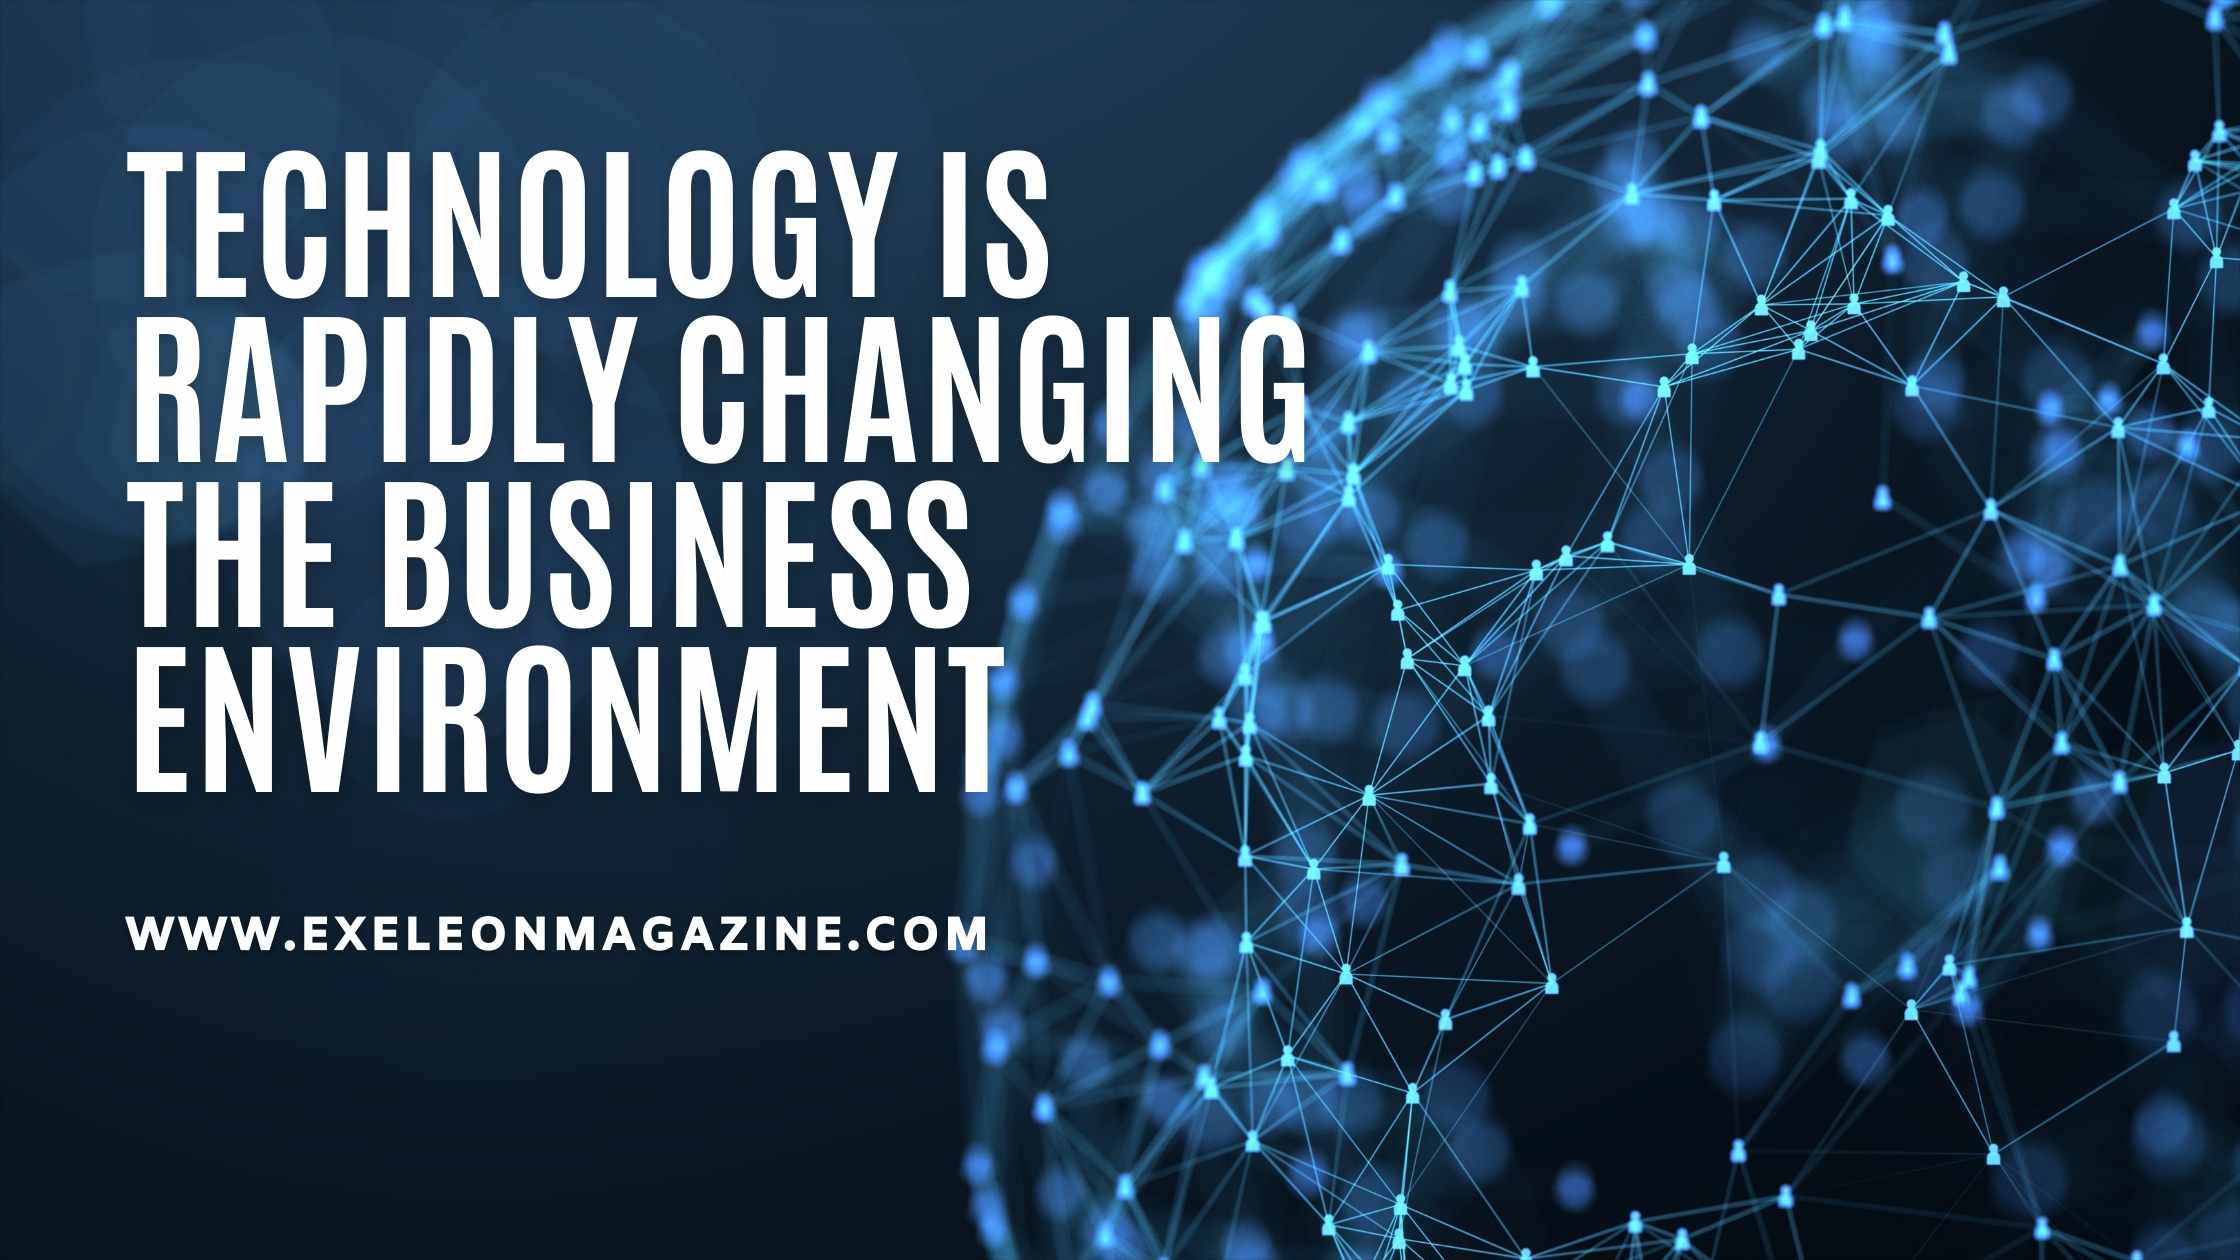 How Technology Is Rapidly Changing the Business Environment